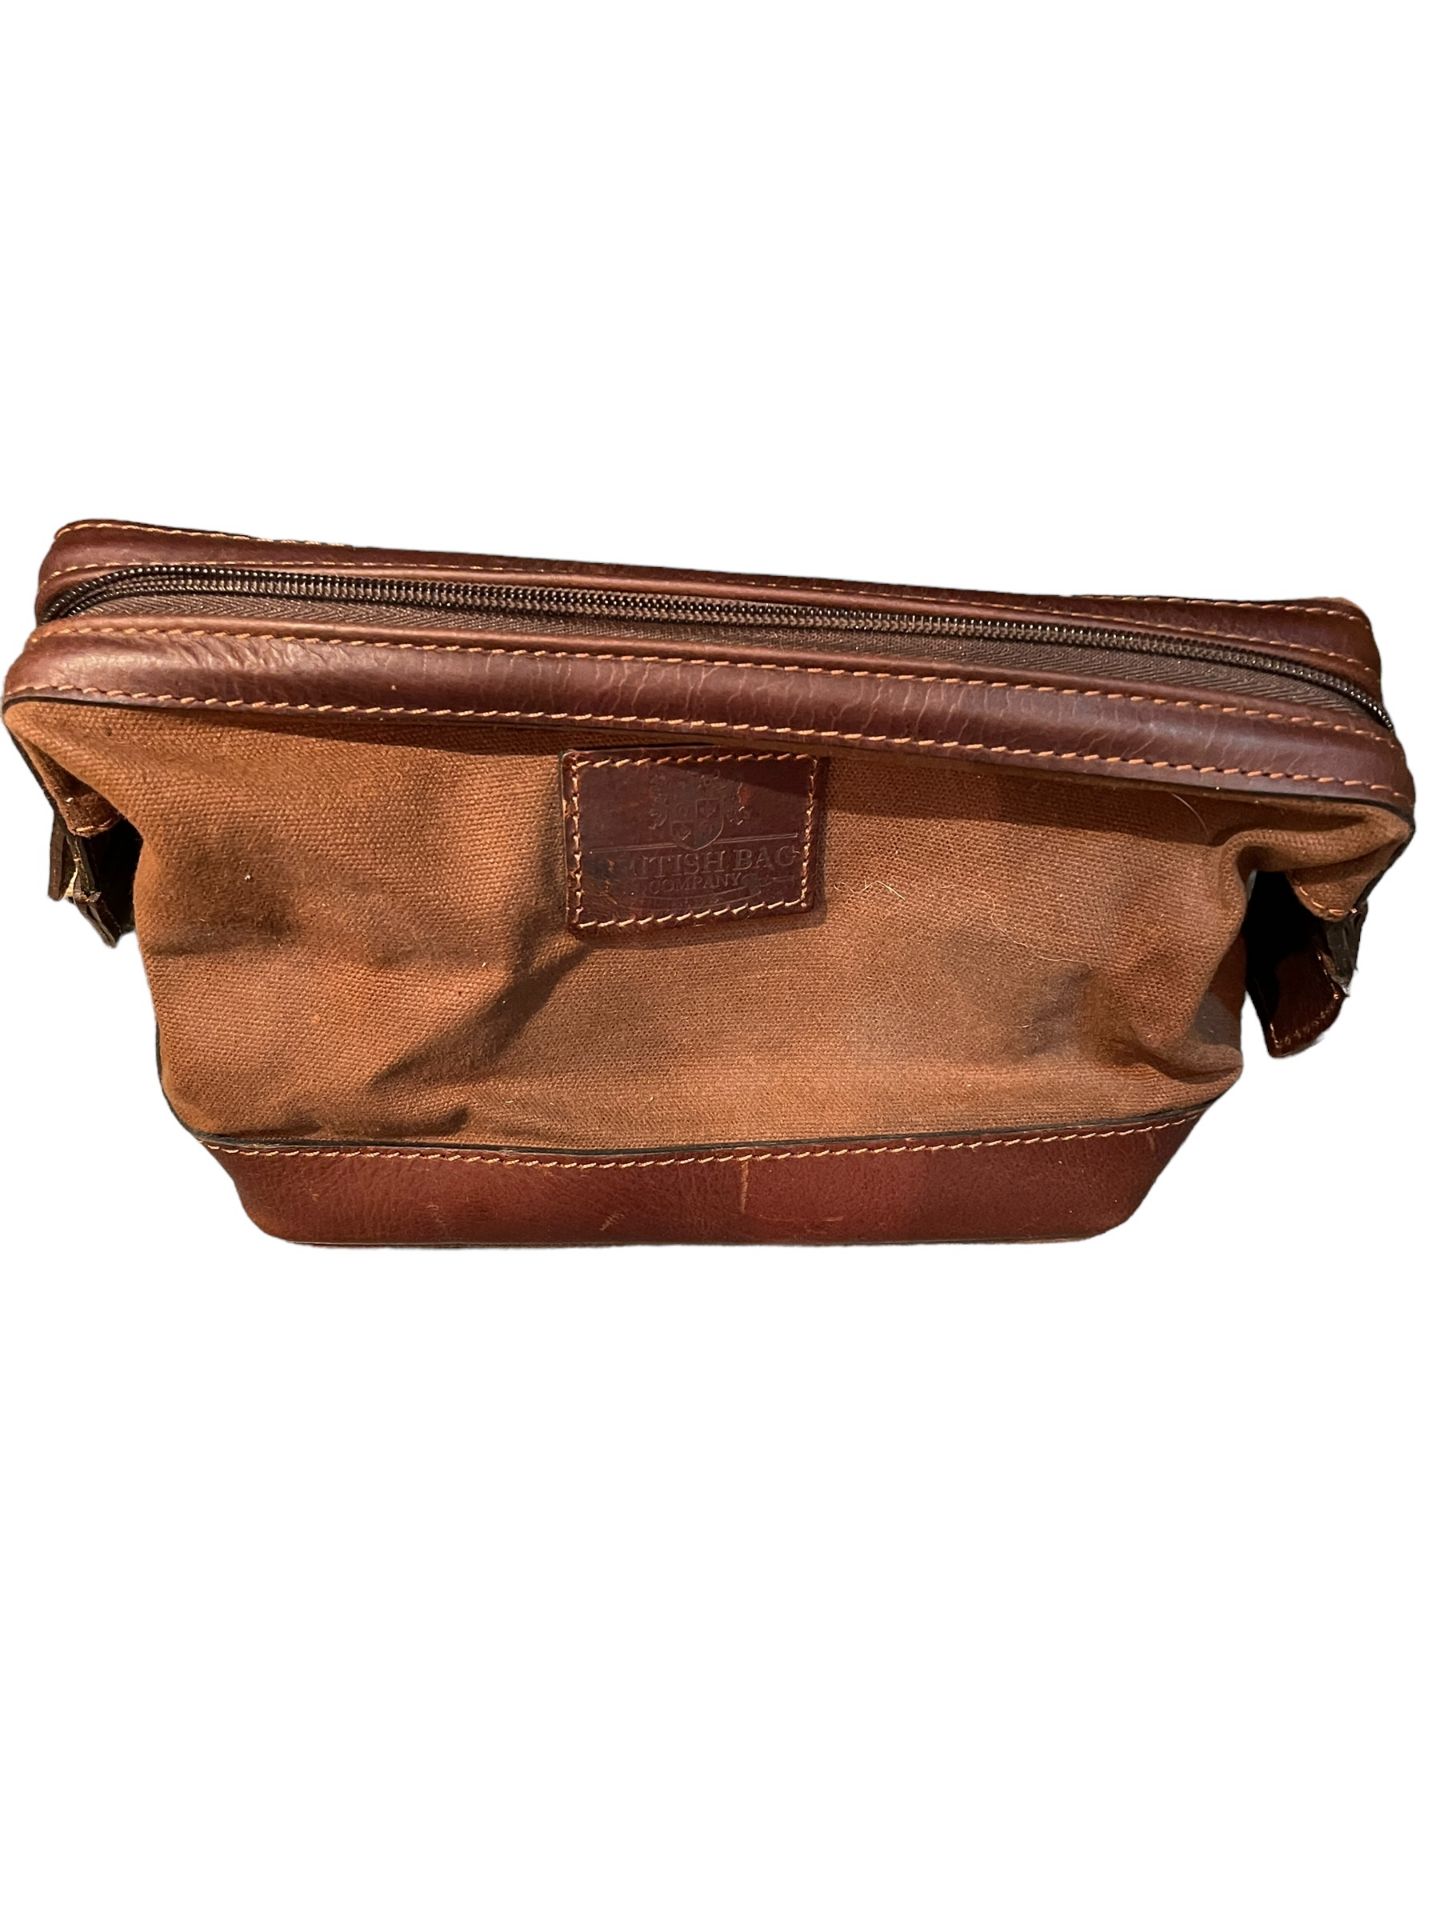 British wash men's toilet bag new x stock from a private jet charter.